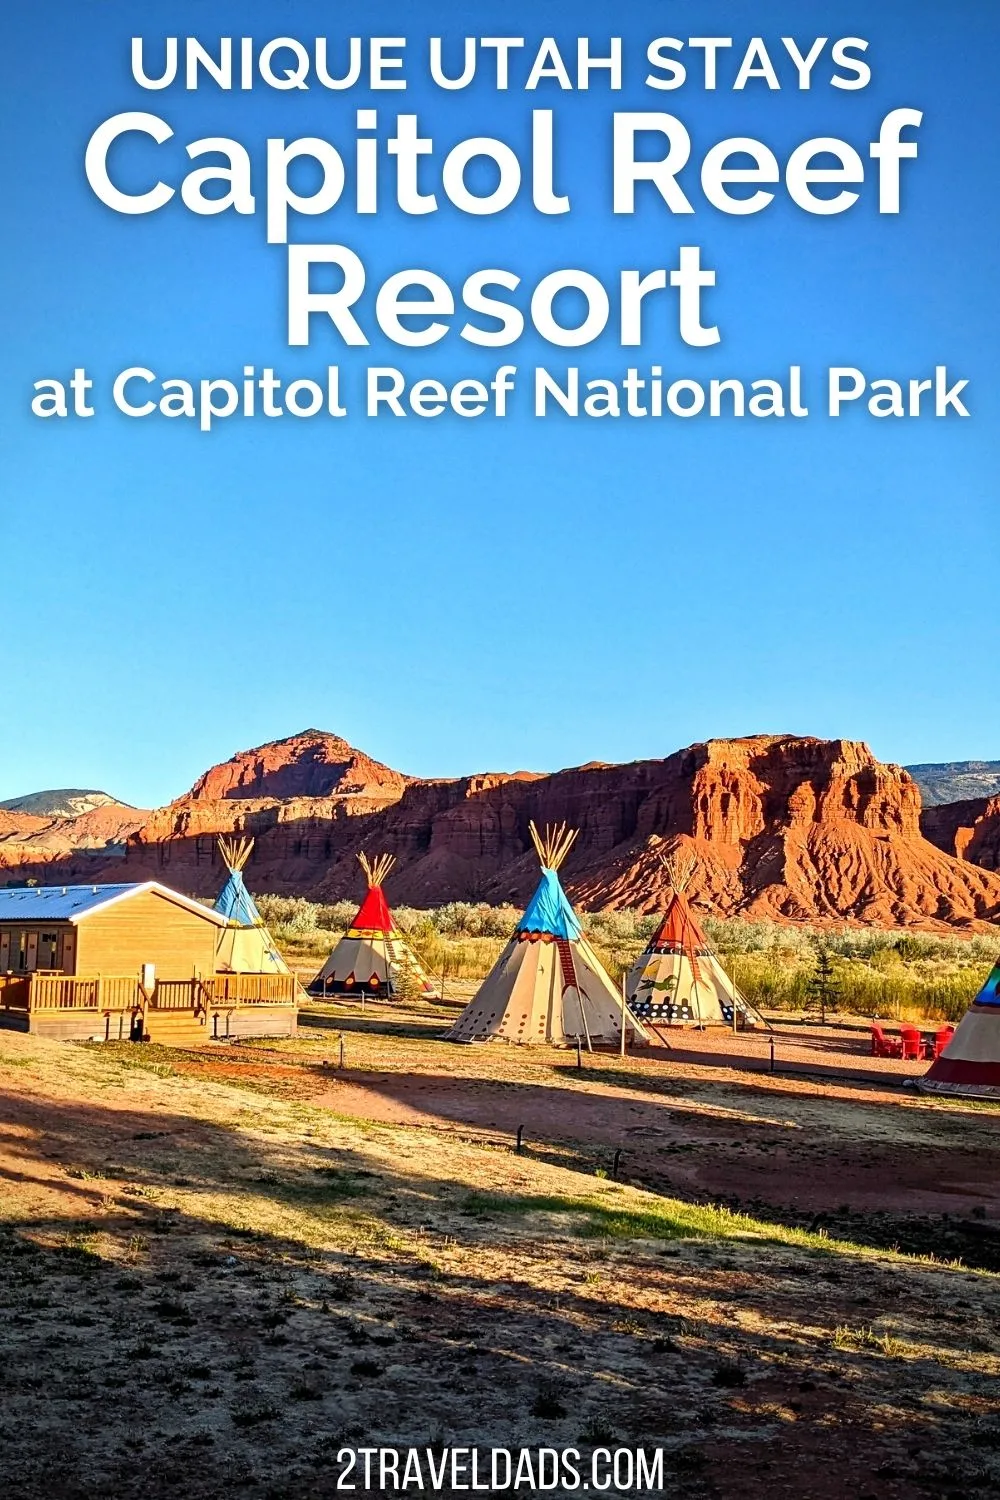 Zo snel als een flits Schat Caroline Review of the Capitol Reef Resort Just Outside Capitol Reef National Park